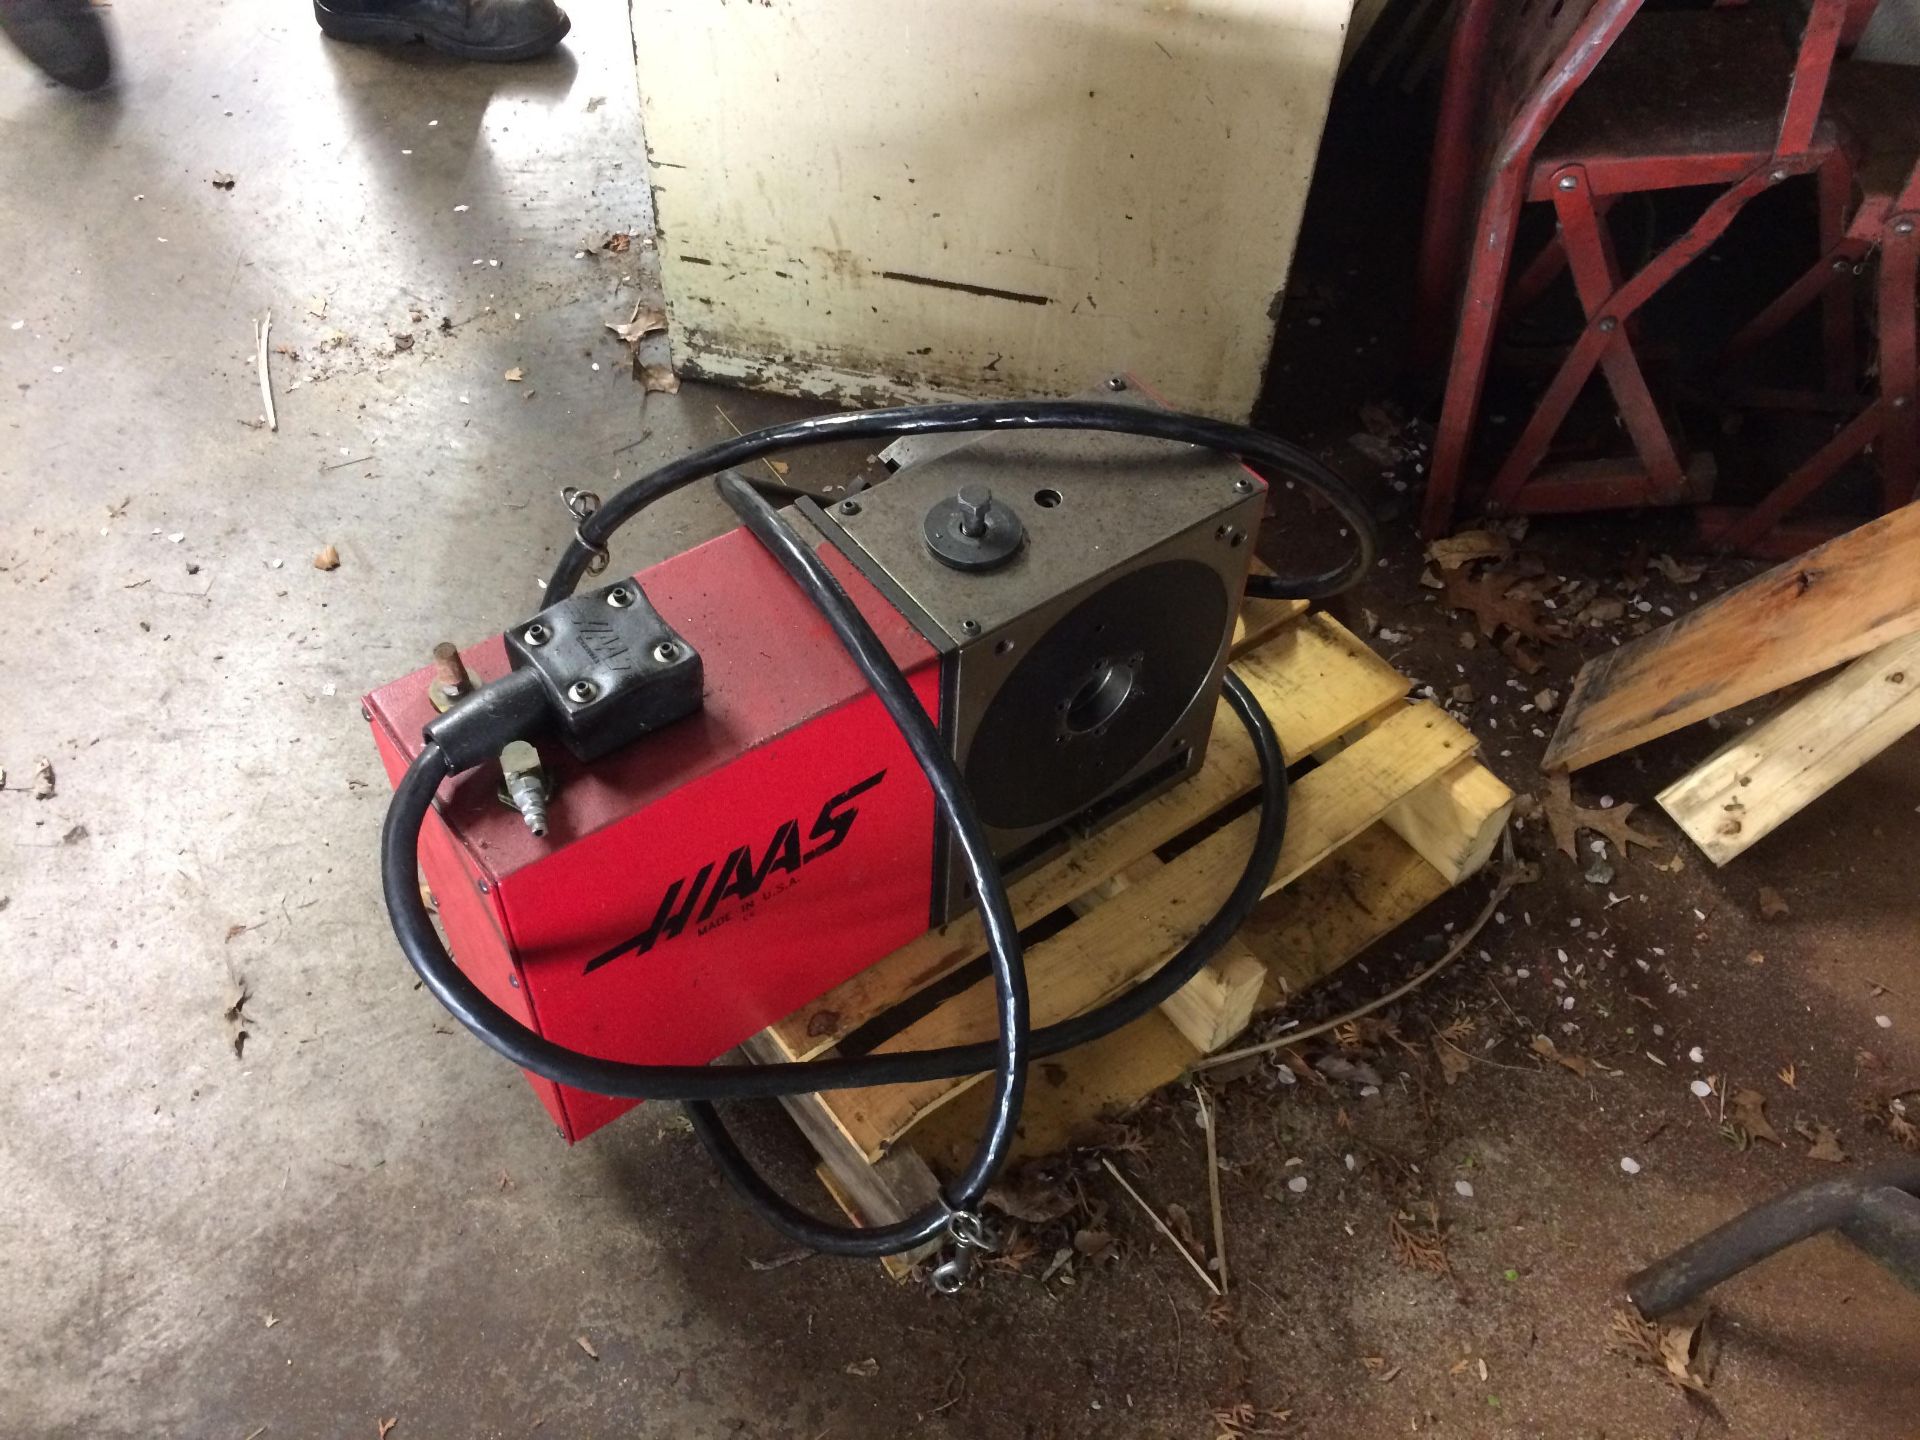 Haas 8” rotary indexer with control